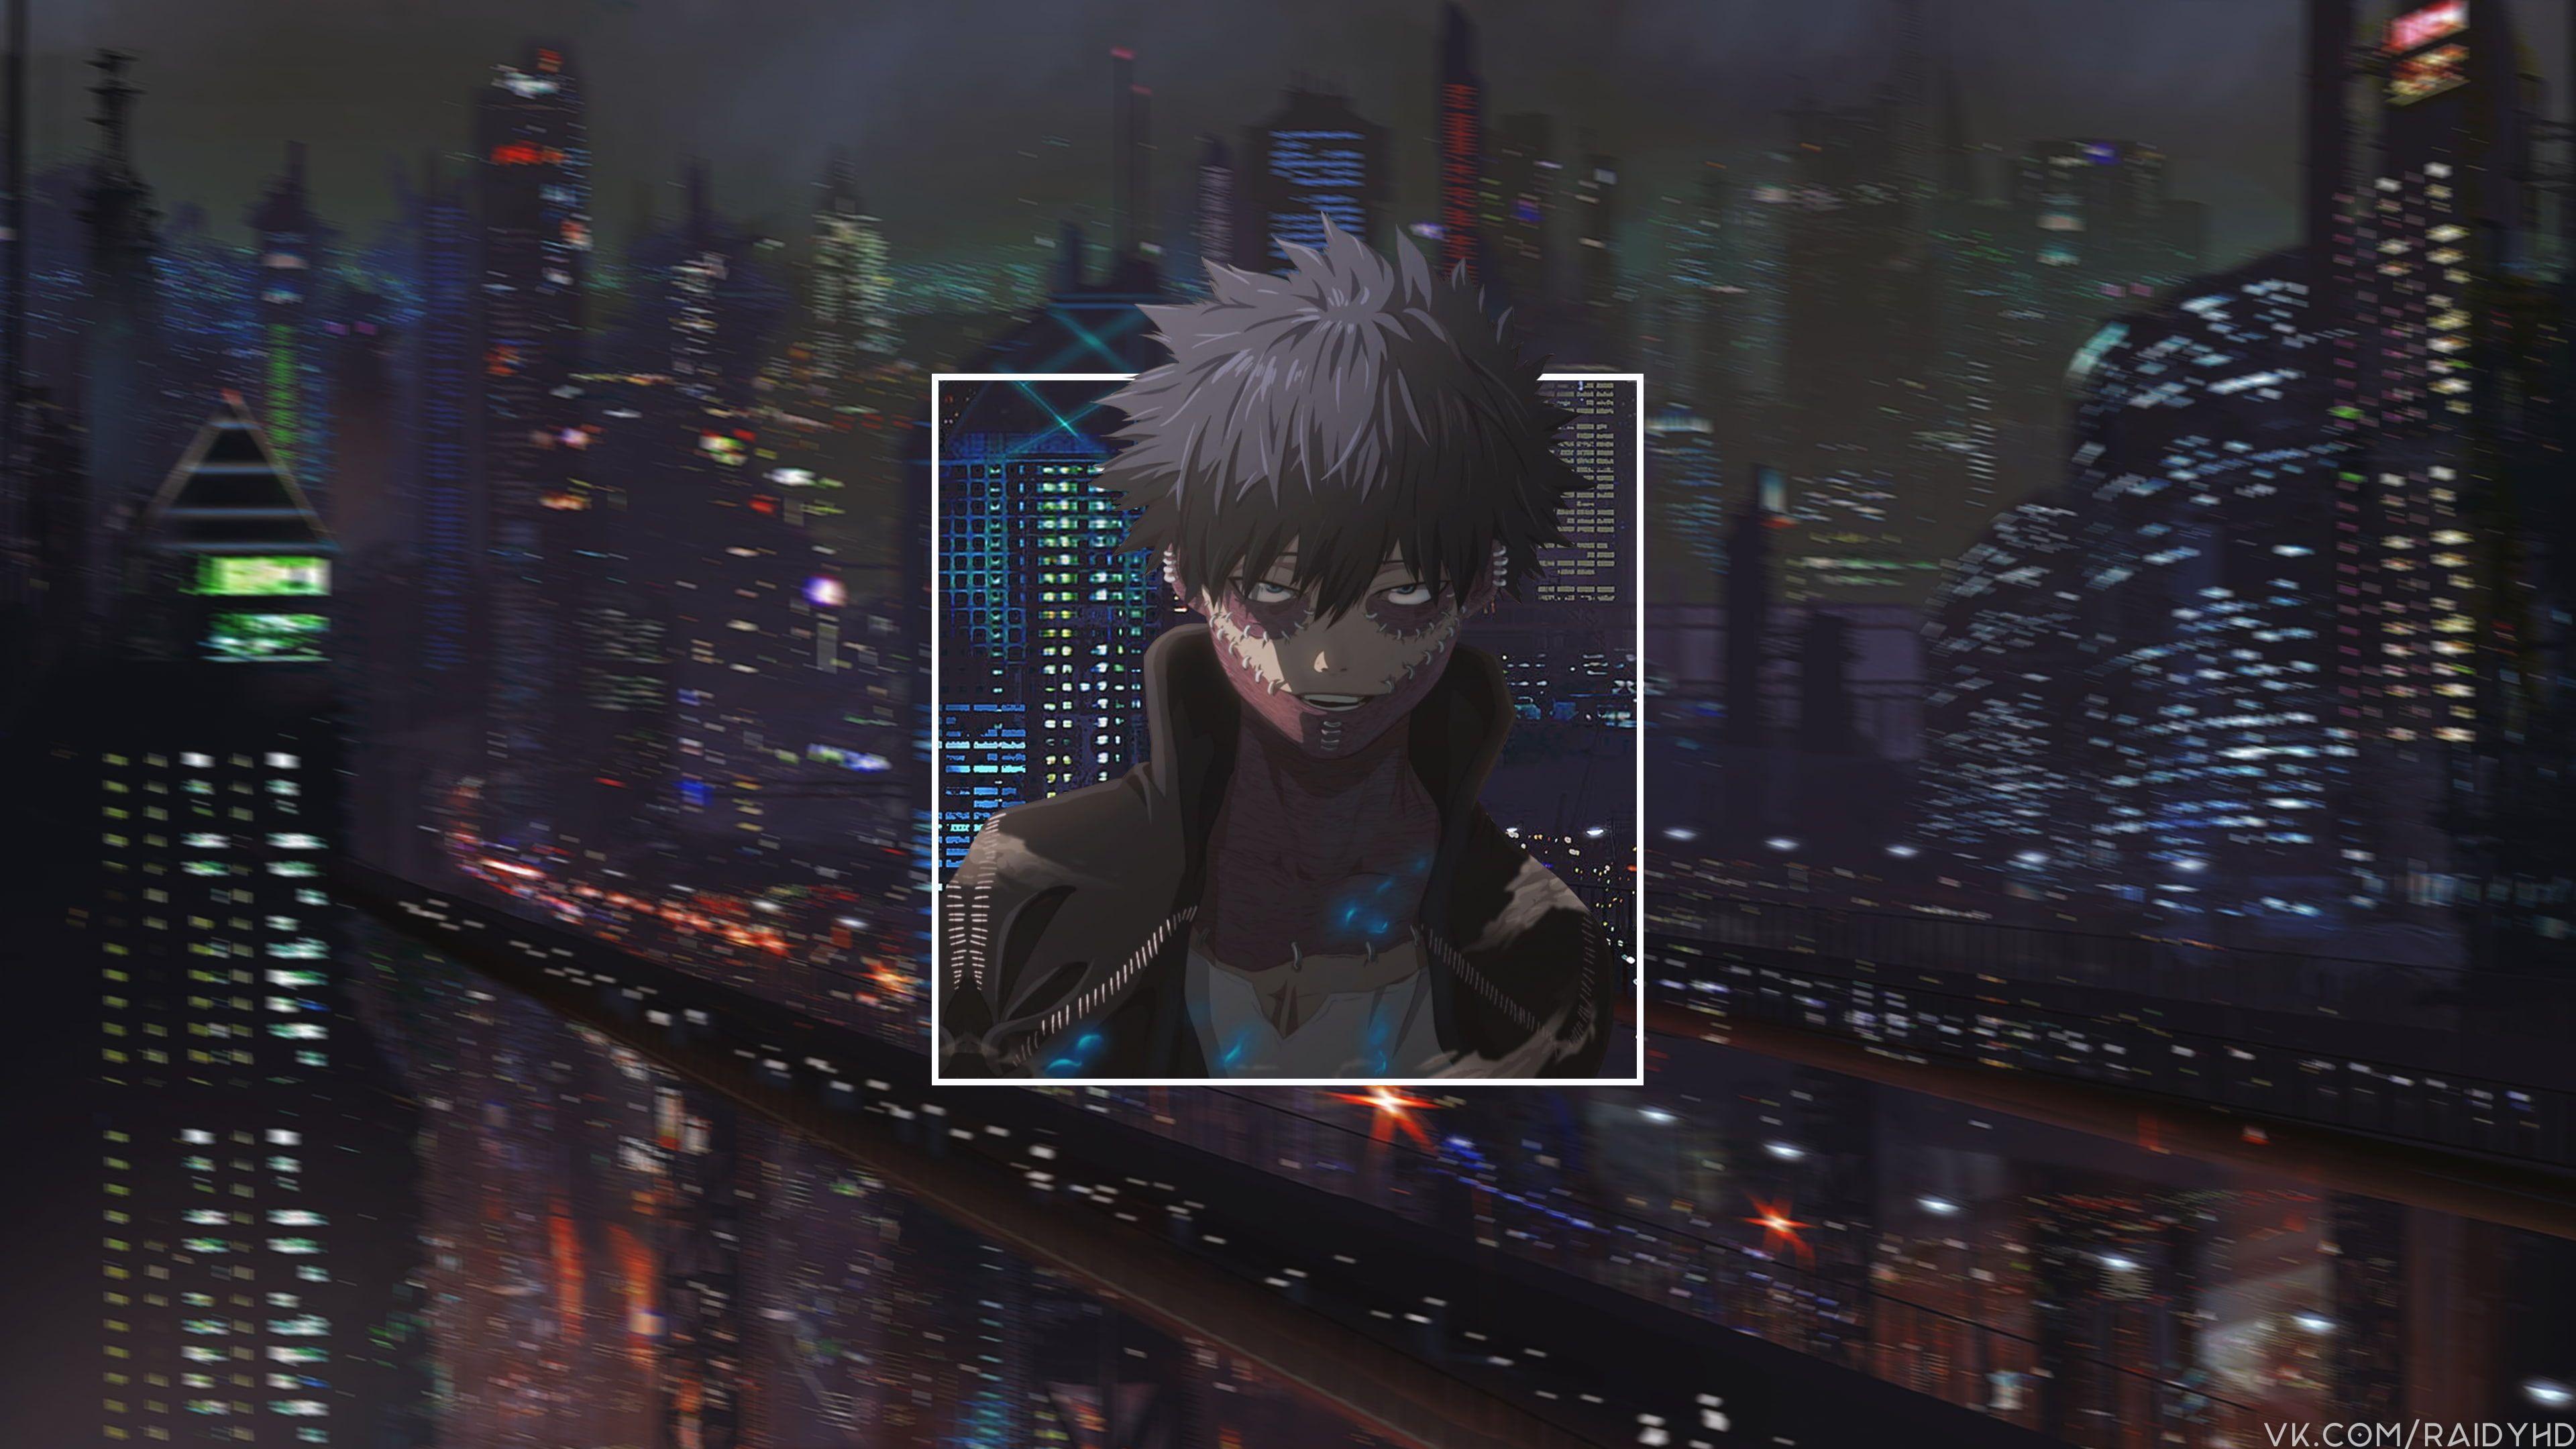 Anime Anime Boys #Dabi #picture In Picture K #wallpaper #hdwallpaper #des. Anime Wallpaper Background Desktop Dark, Anime Wallpaper, Anime Computer Wallpaper